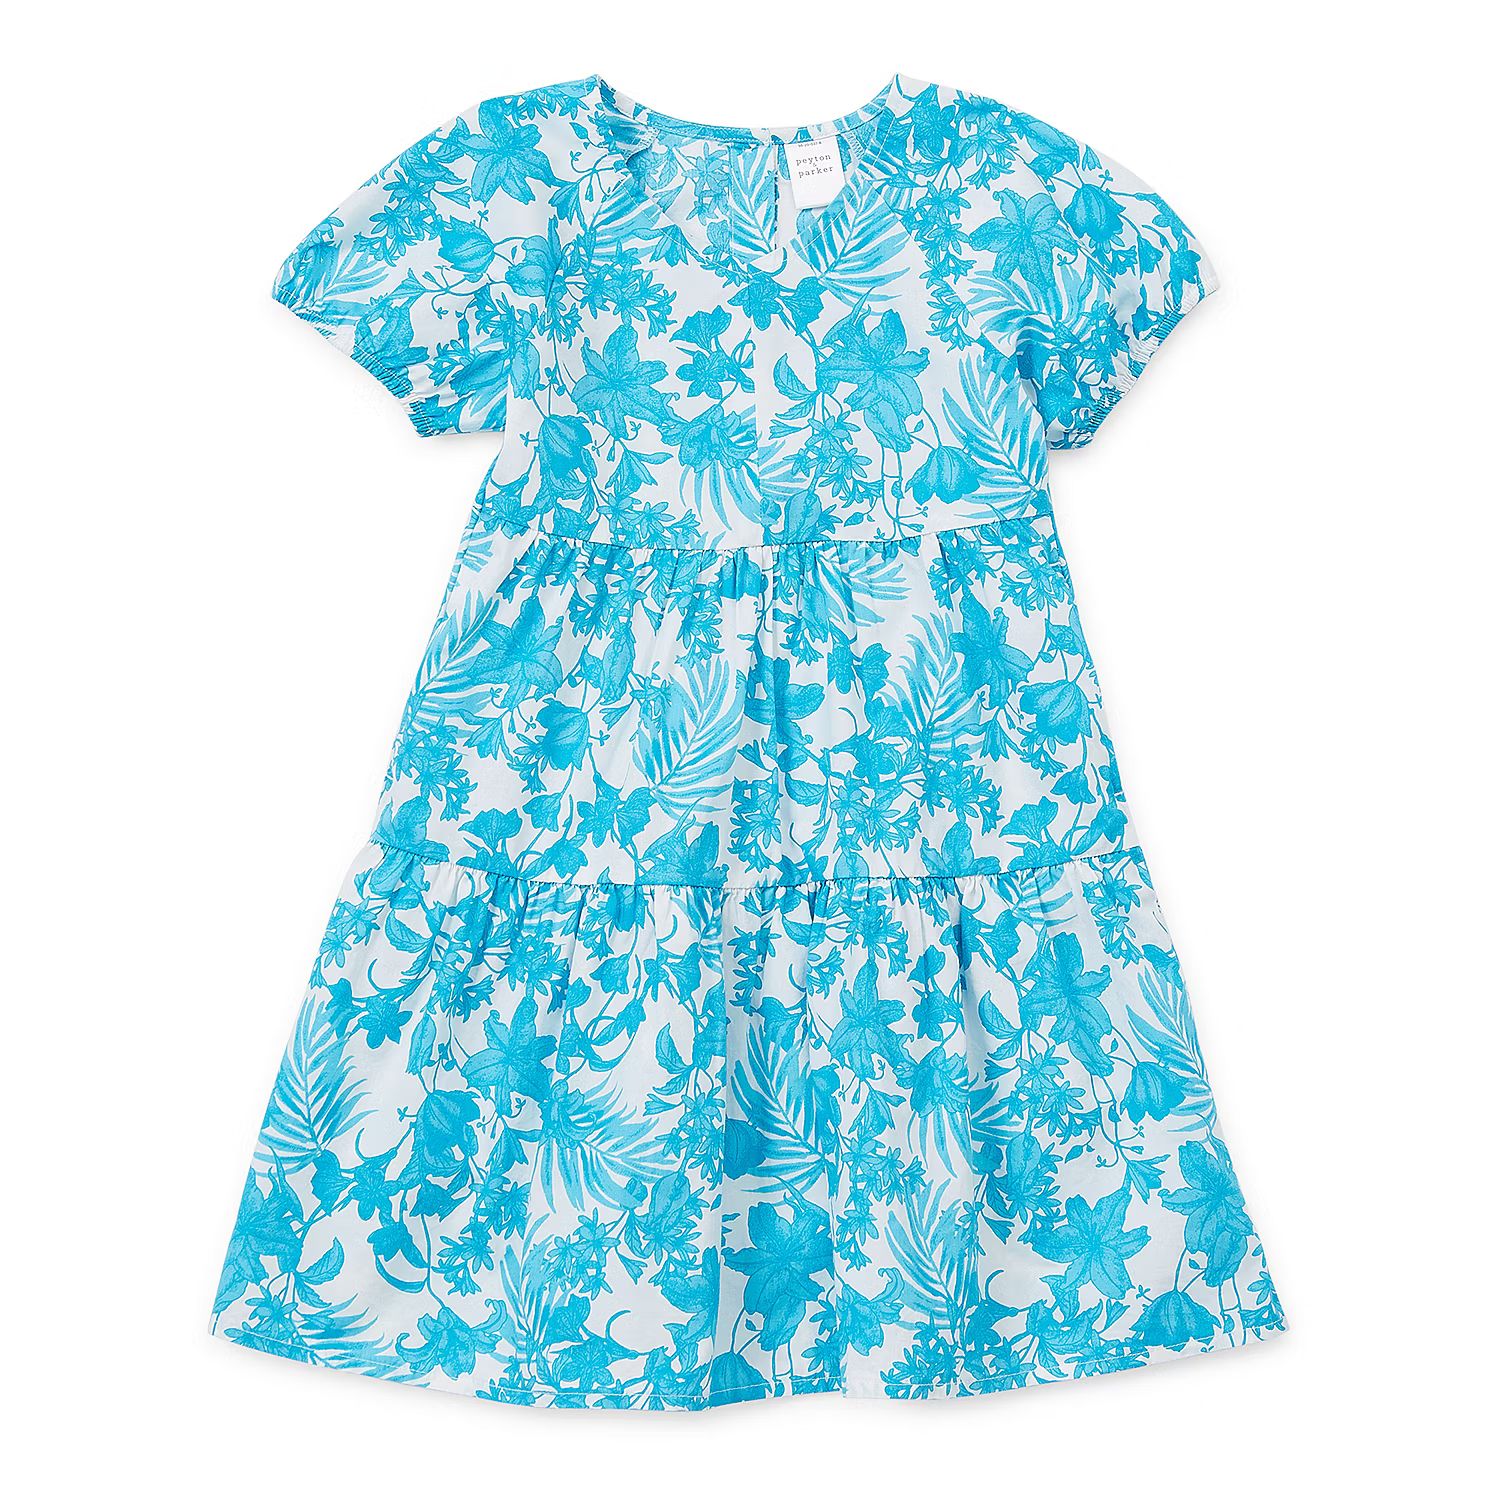 Peyton & Parker Toddler Girls Short Sleeve Puffed Sleeve Floral Maxi Dress | JCPenney